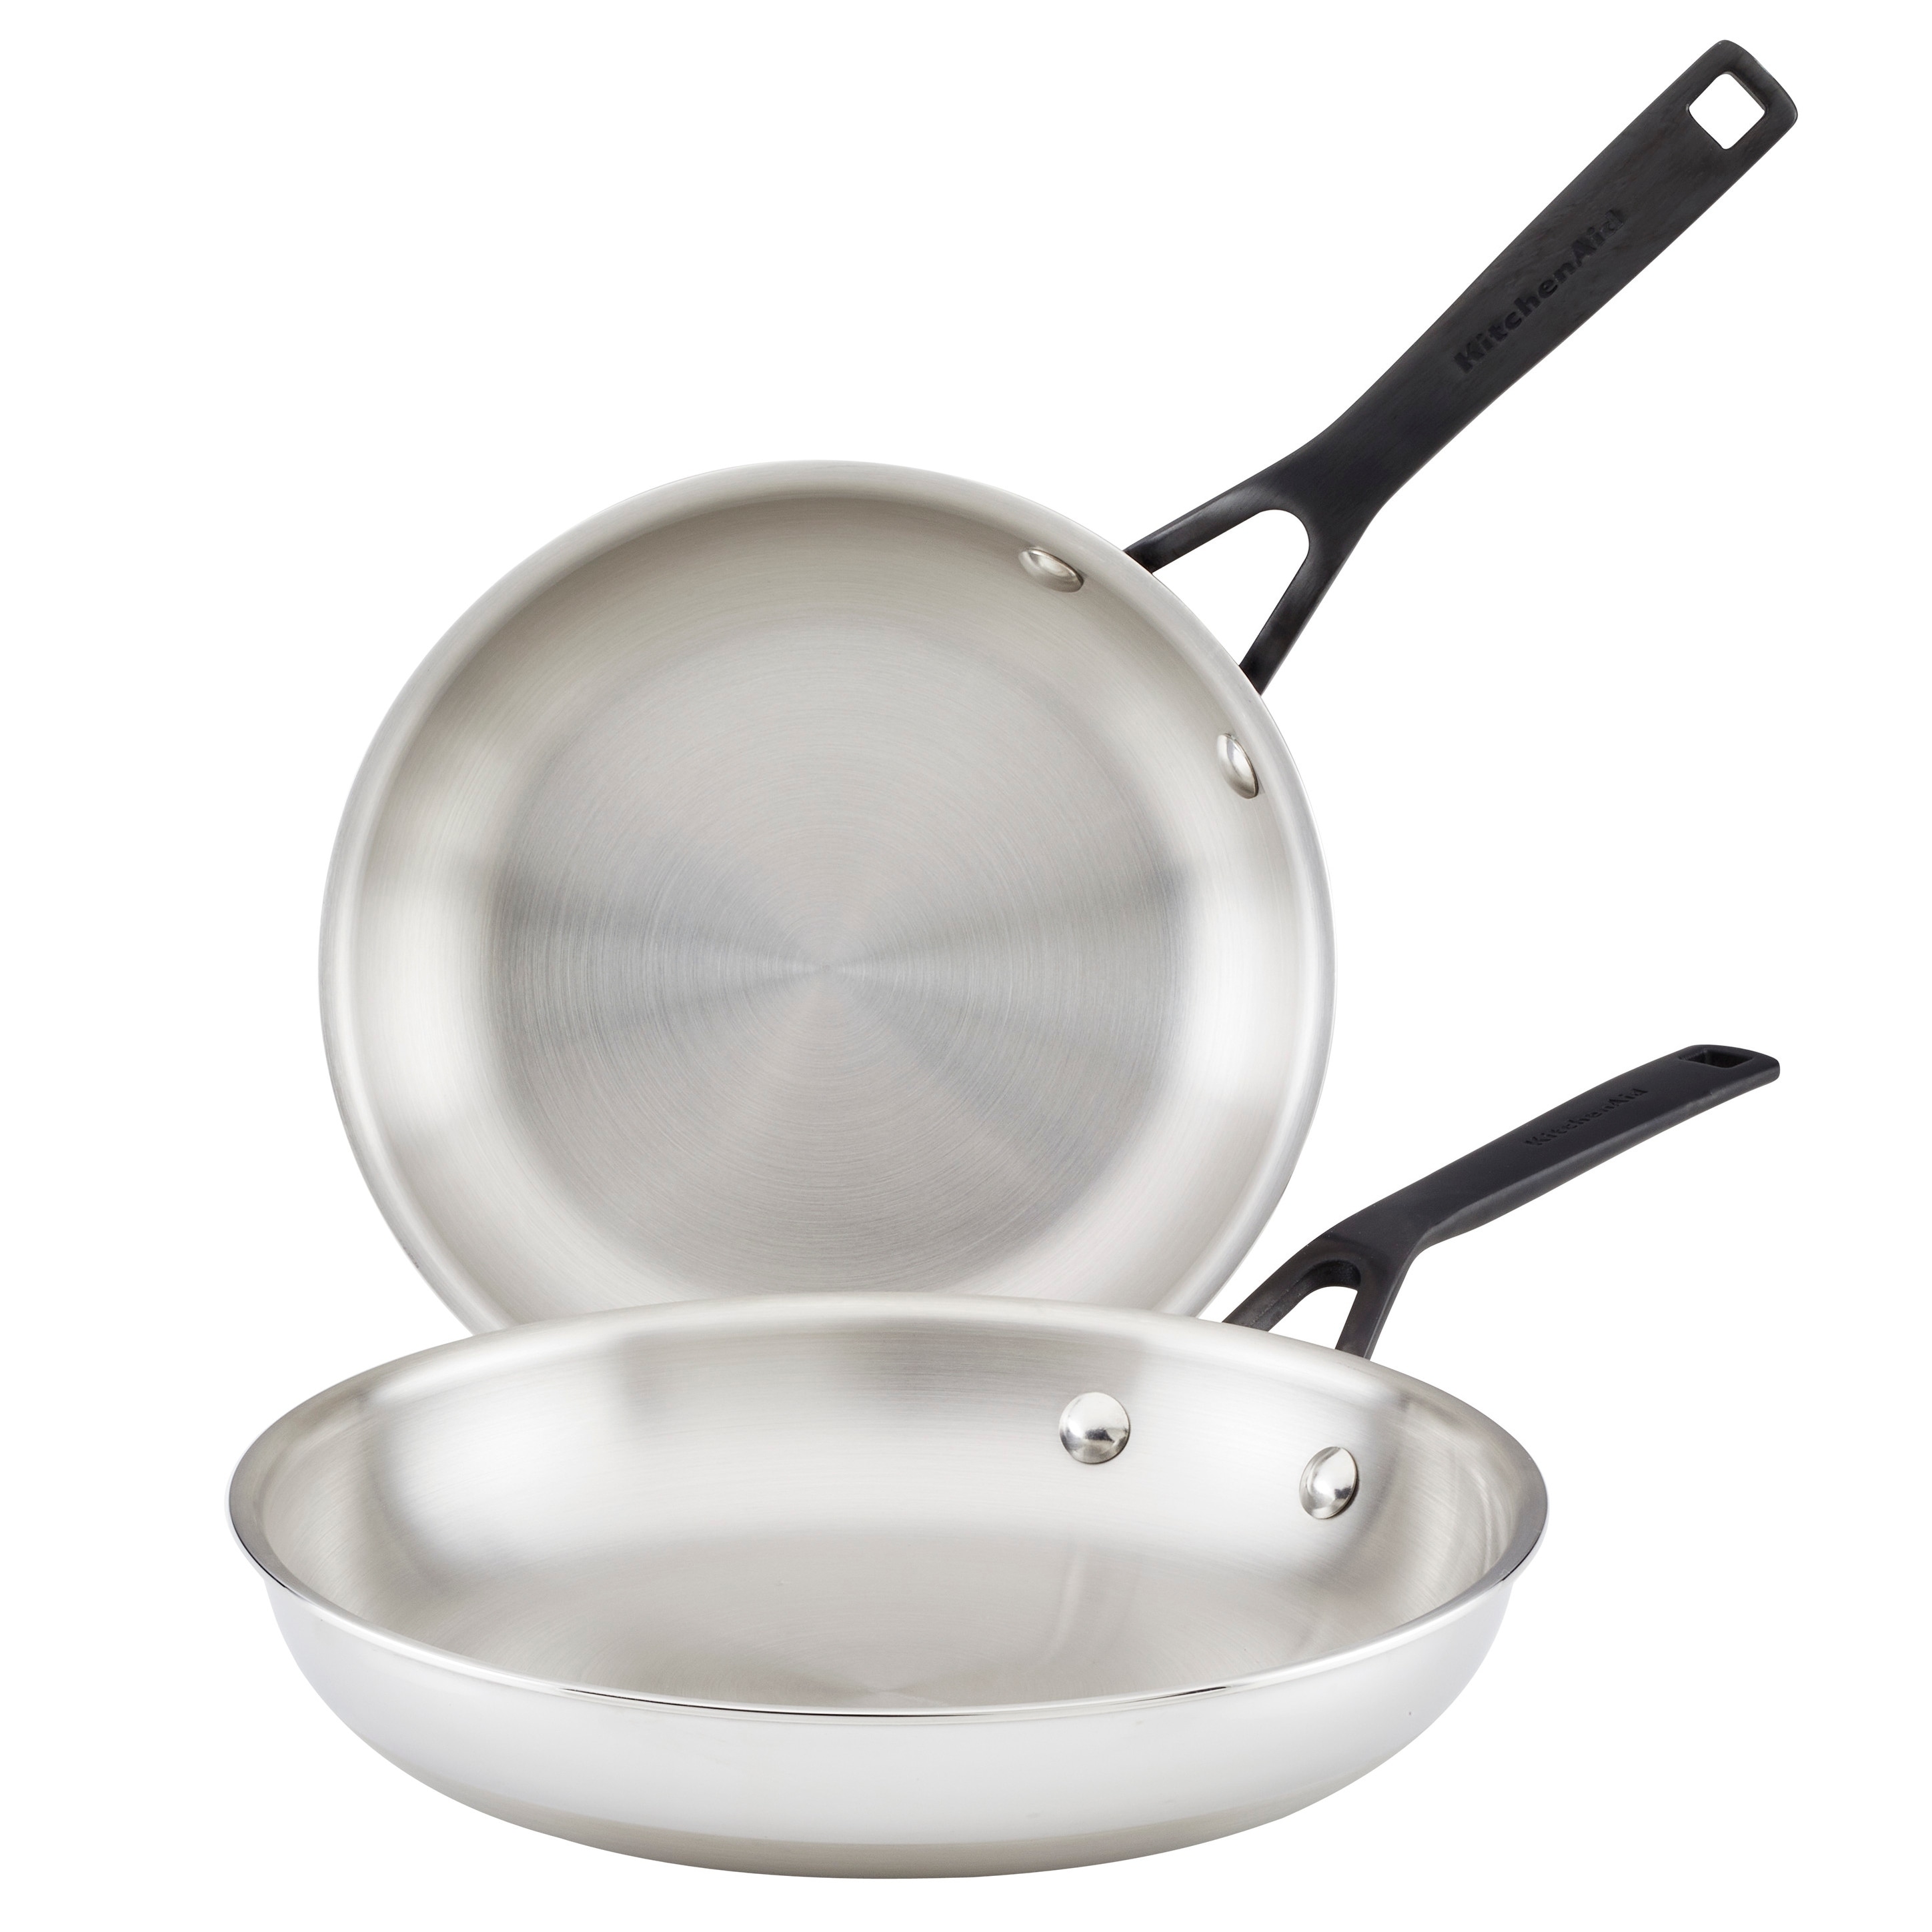 Calphalon Classic Hard Anodized Nonstick 2pc 8 & 10 Inch Frying